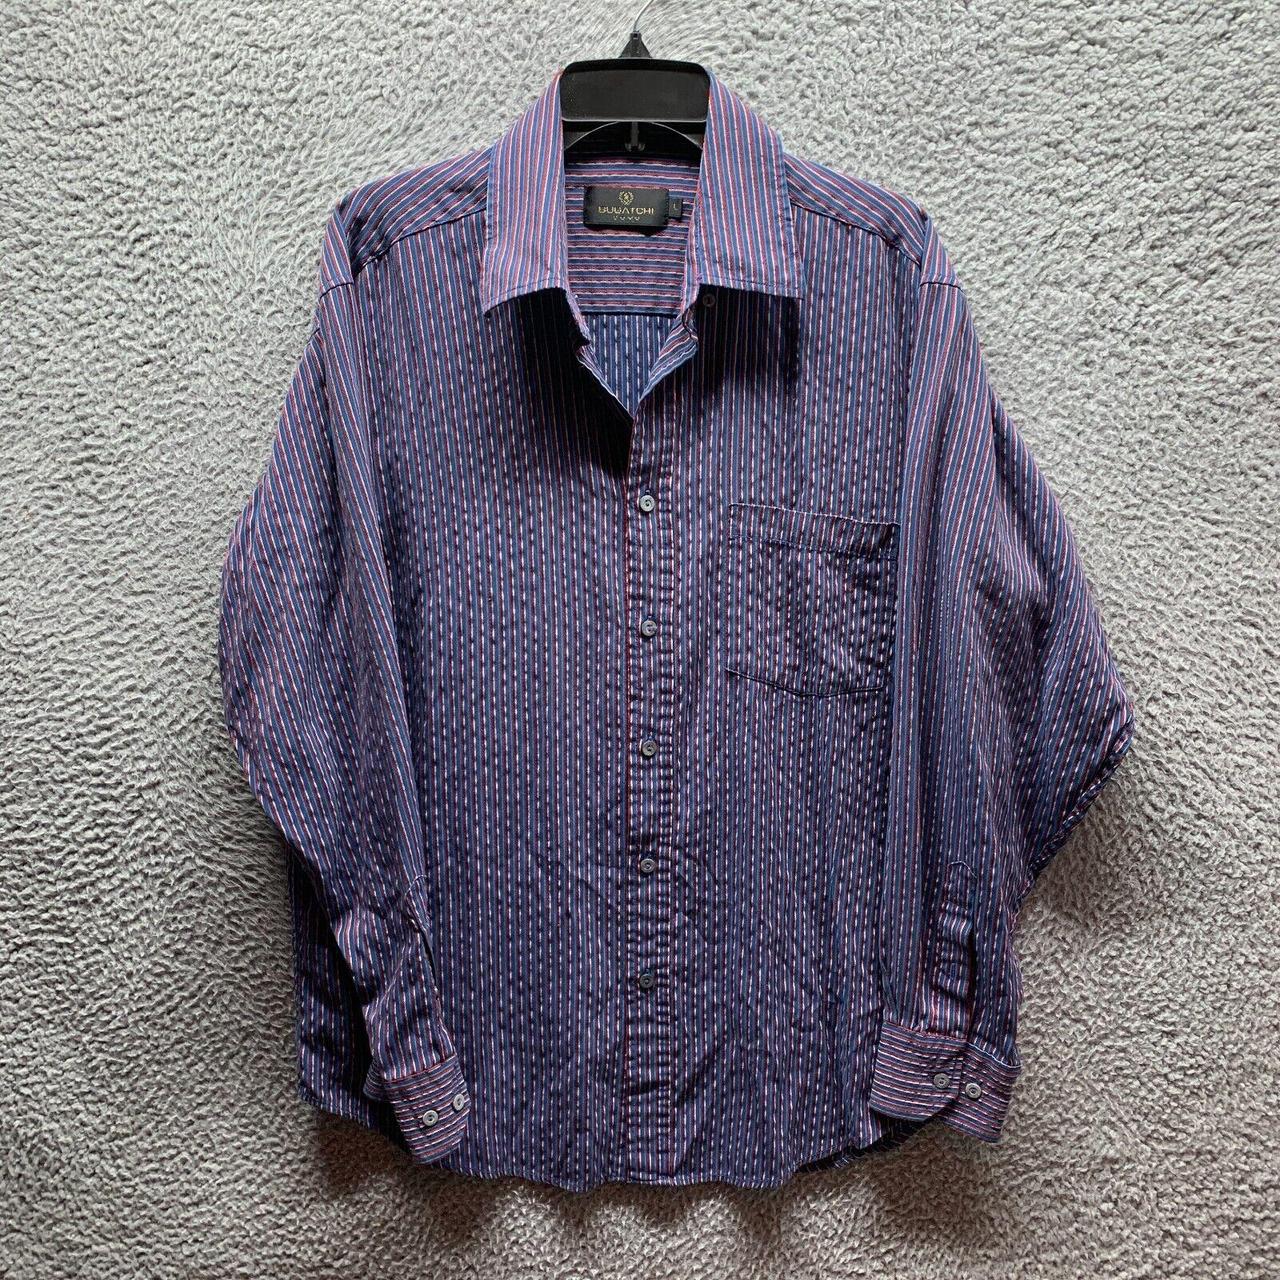 Bugatchi Men's Blue and Red Shirt